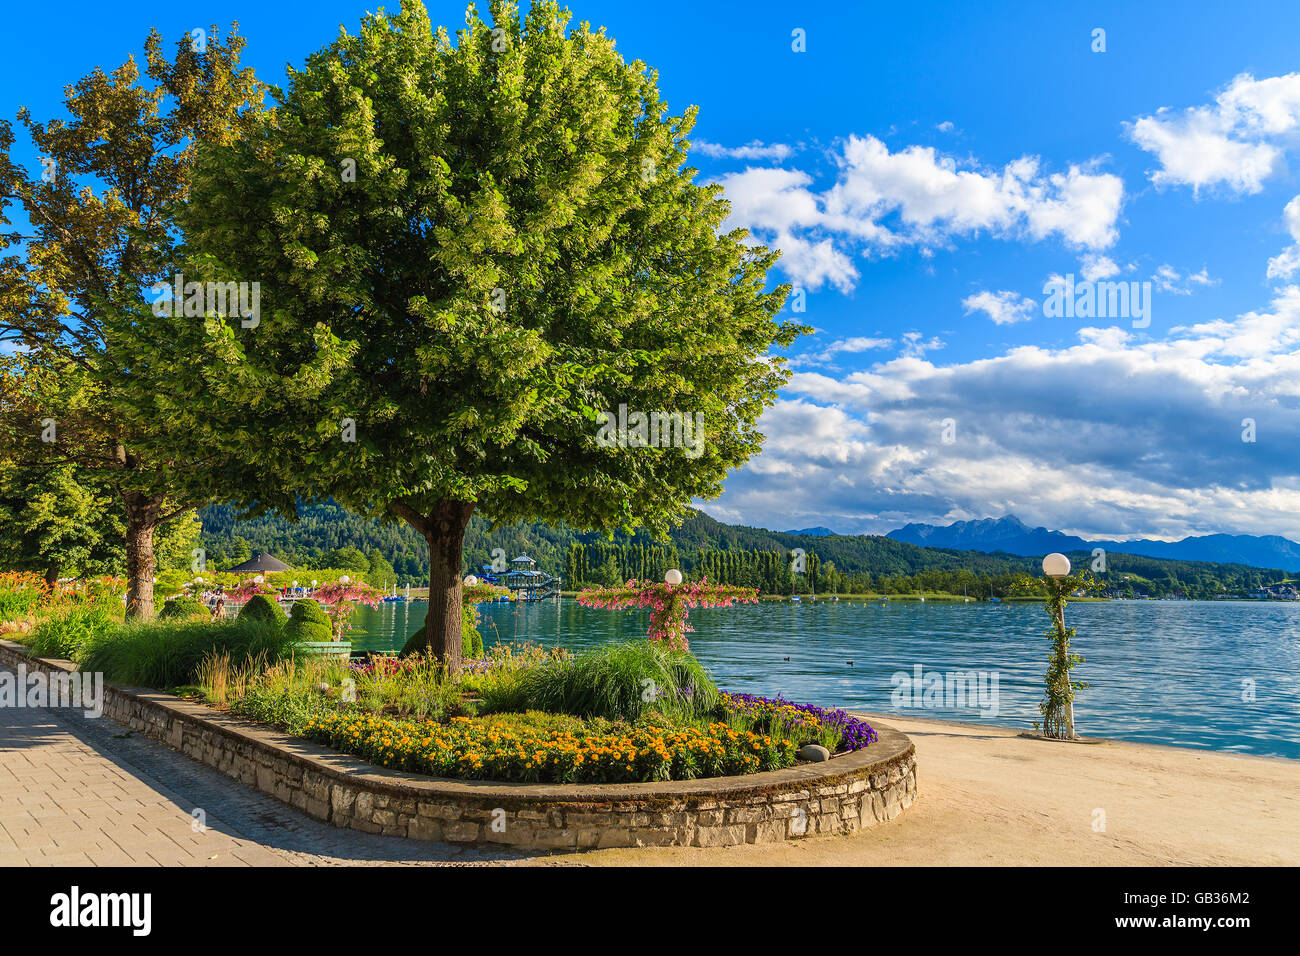 Promenade with flowers along Worthersee lake on beautiful summer day, Austria Stock Photo